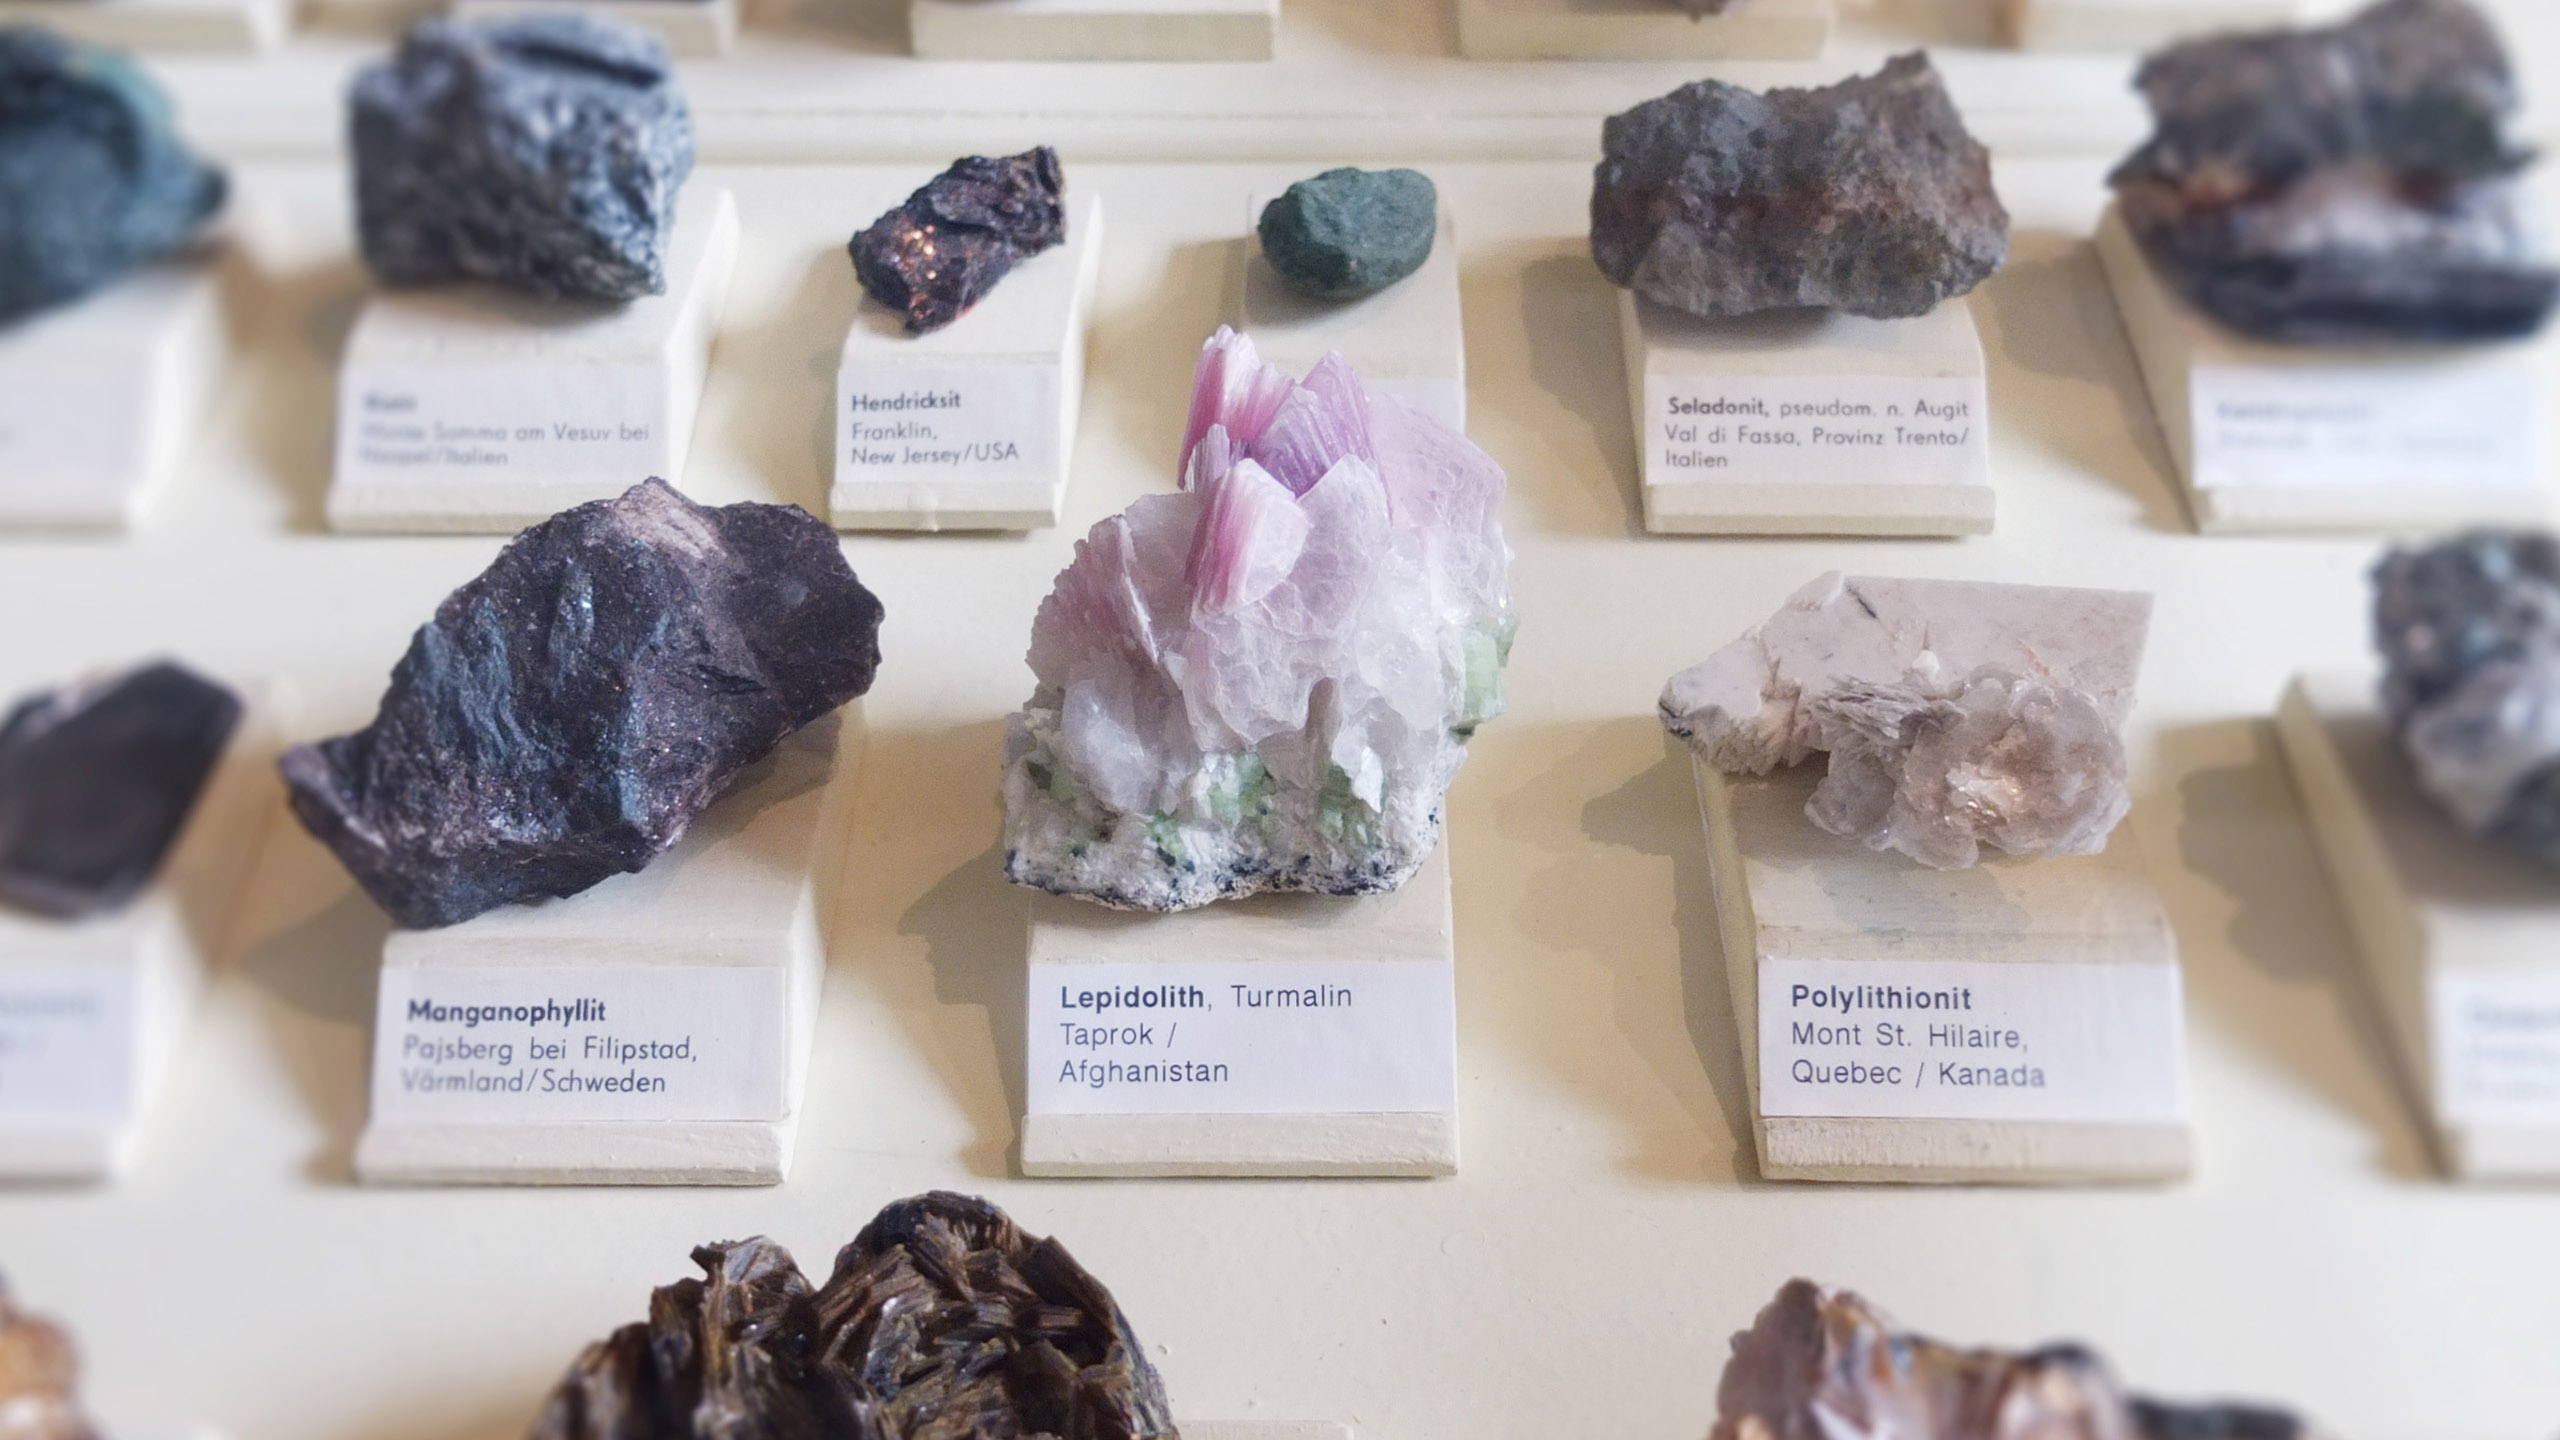 Minerals of Mexico